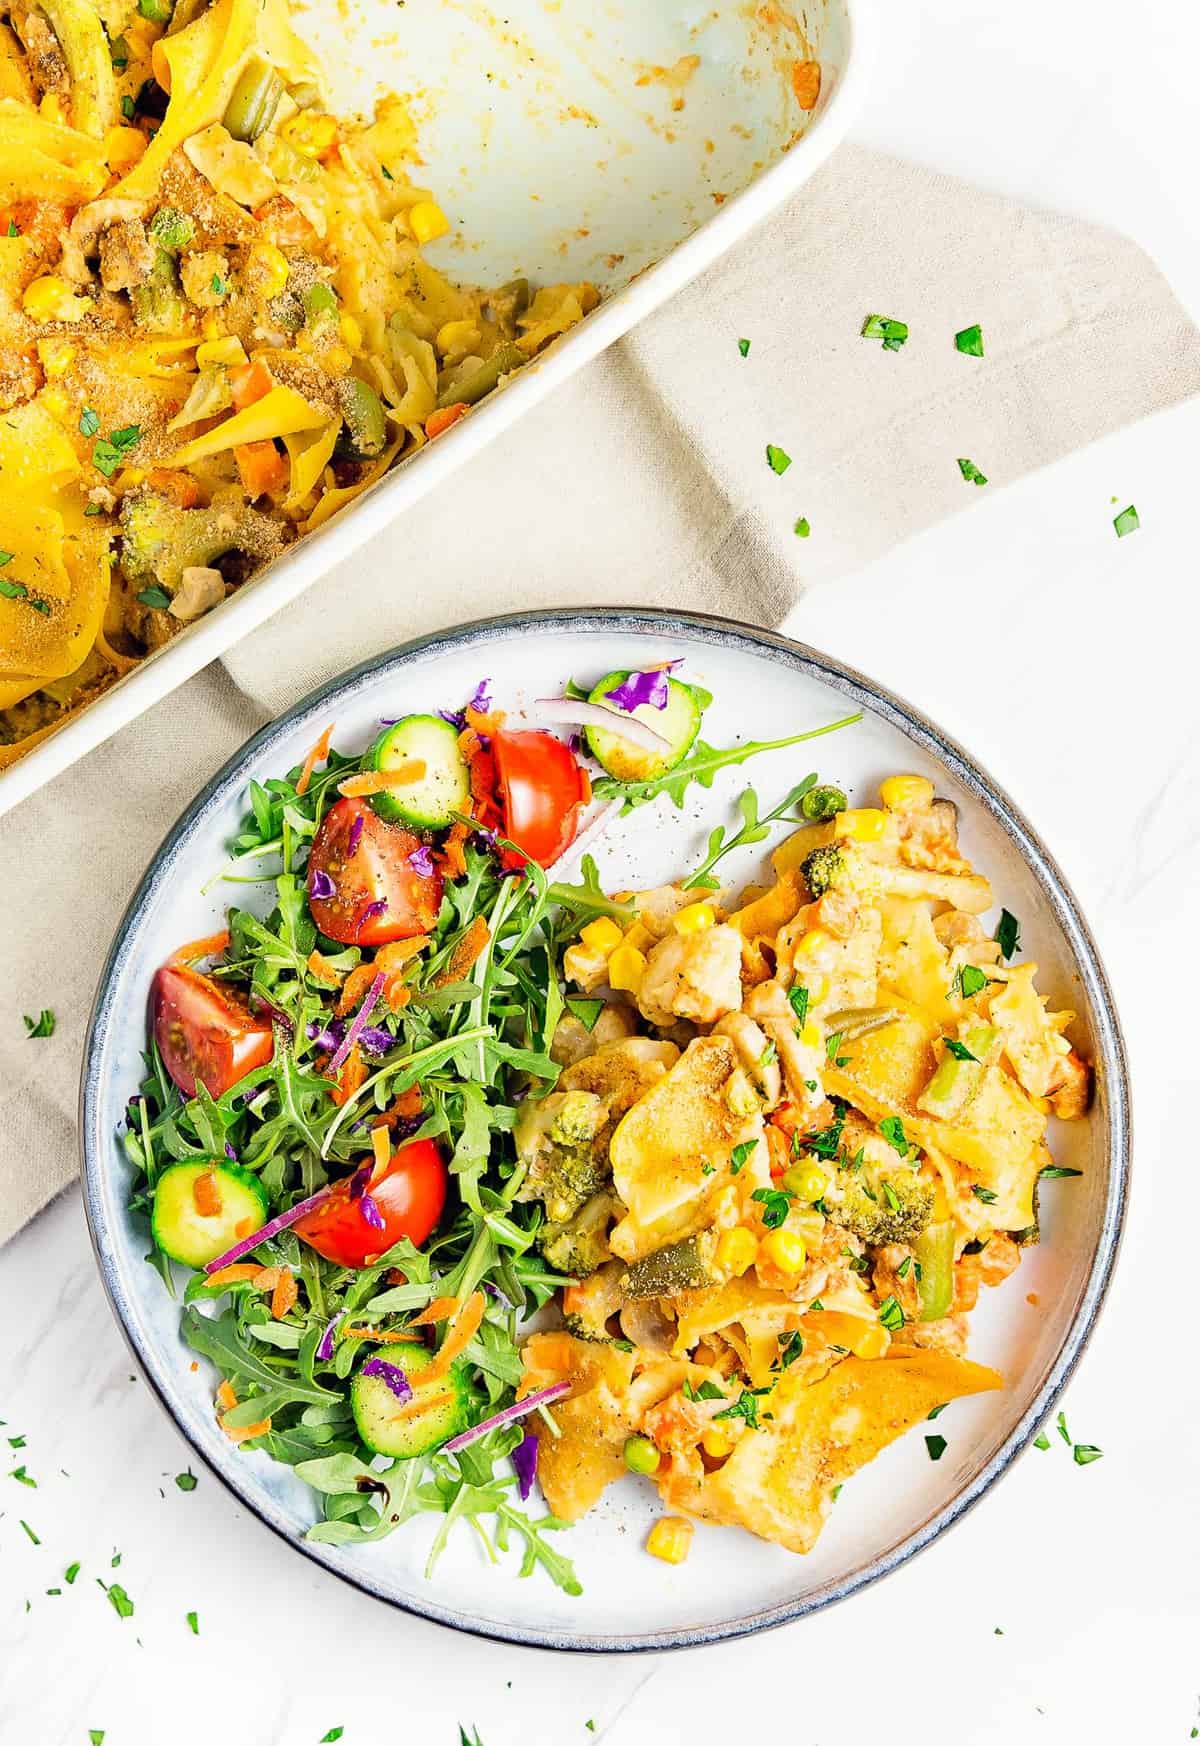 Vegan Tuna Noodle Casserole, vegan, vegetarian, whole food plant based, gluten free, recipe, wfpb, healthy, oil free, no refined sugar, no oil, refined sugar free, dinner, side, side dish, dairy free, dinner party, entertaining